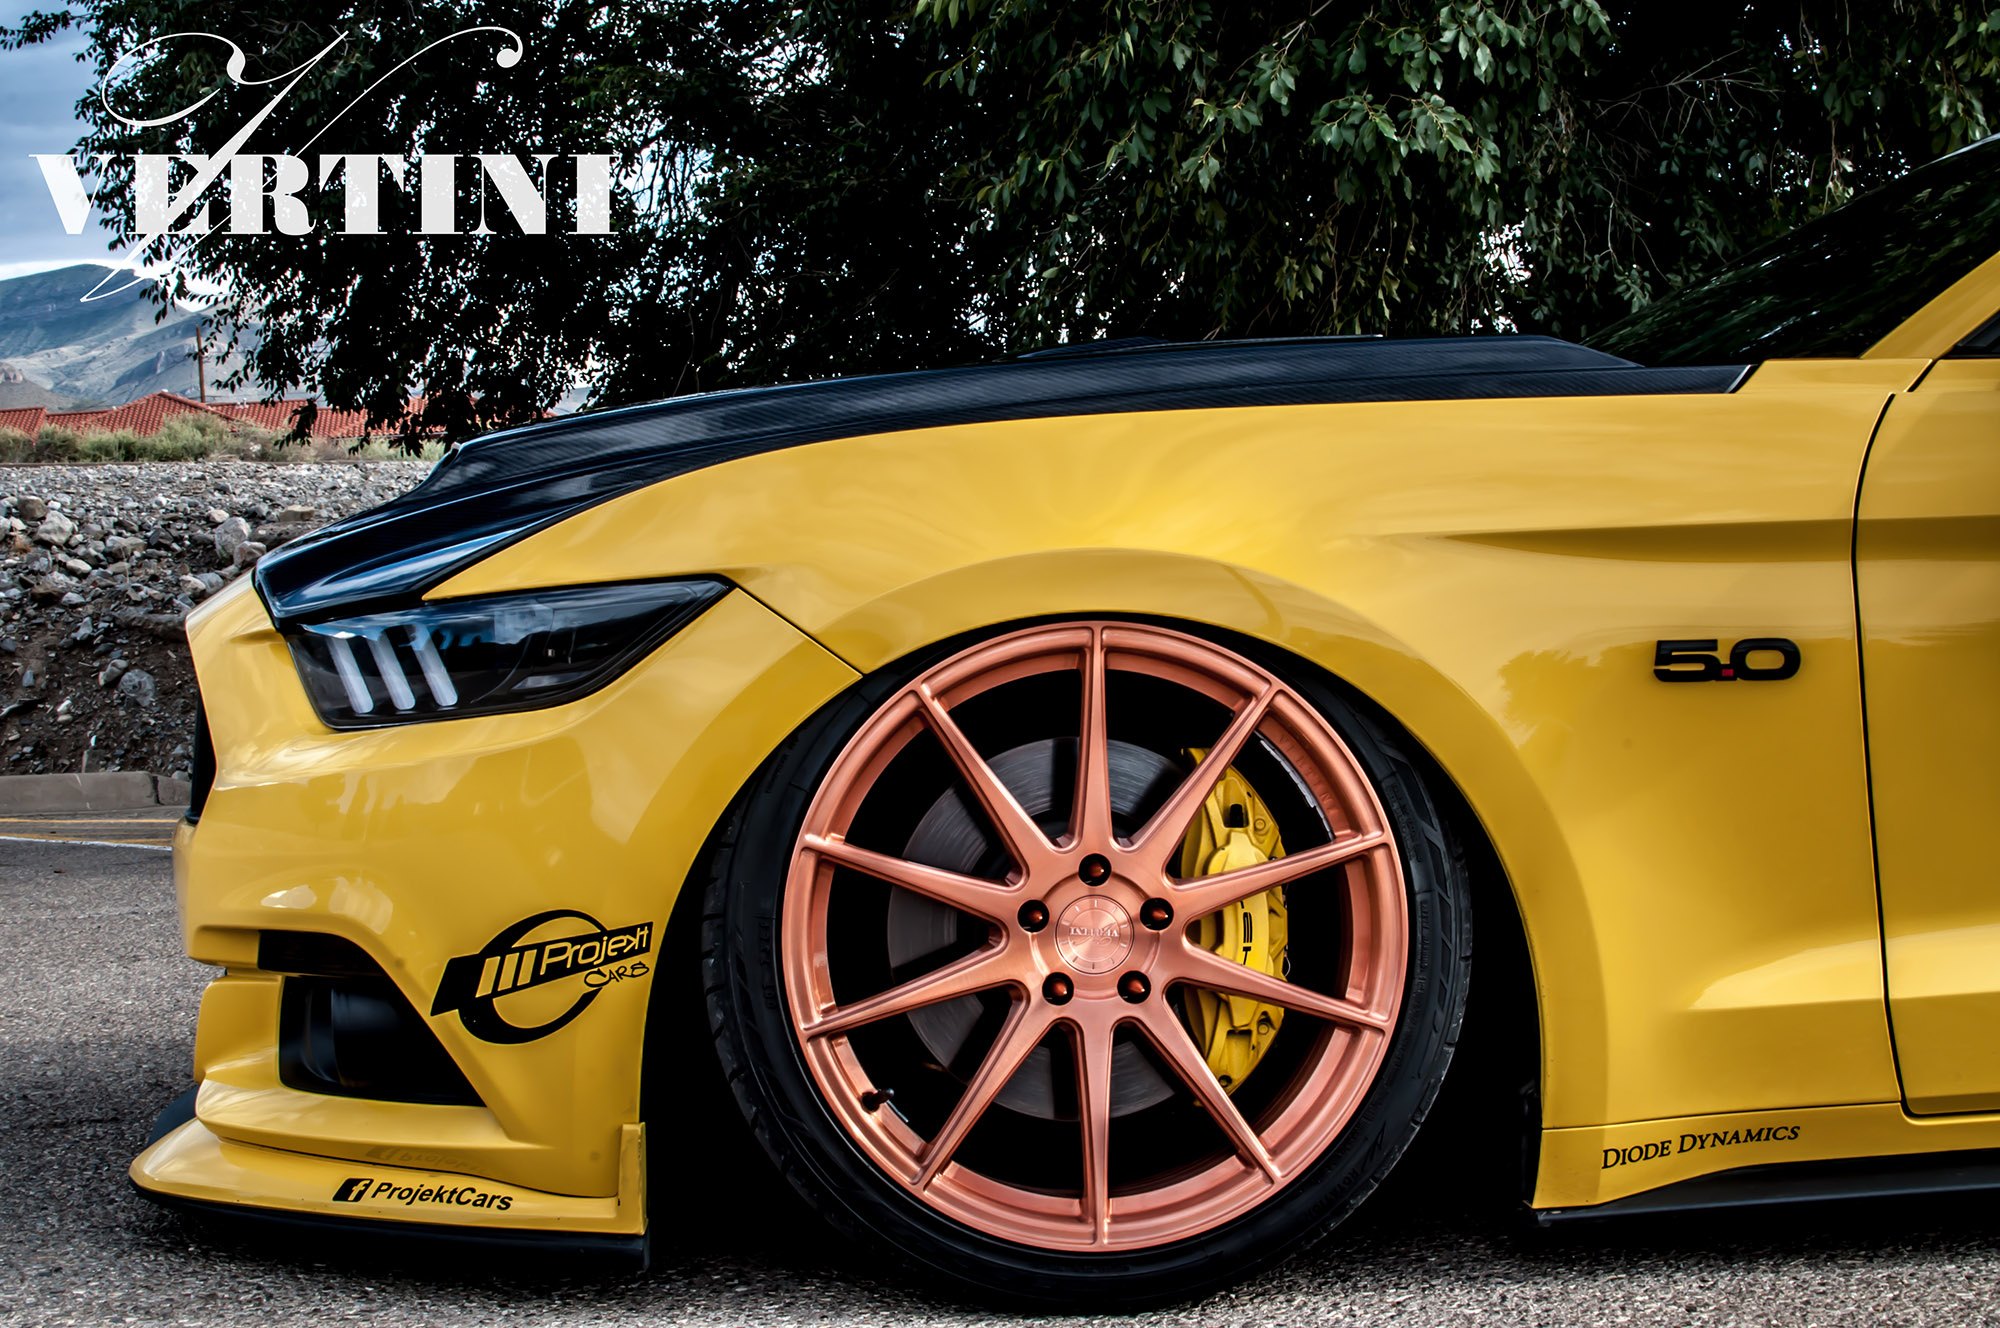 Rose Gold Vertini Wheels on Yellow Ford Mustang - Photo by Vertini Wheels